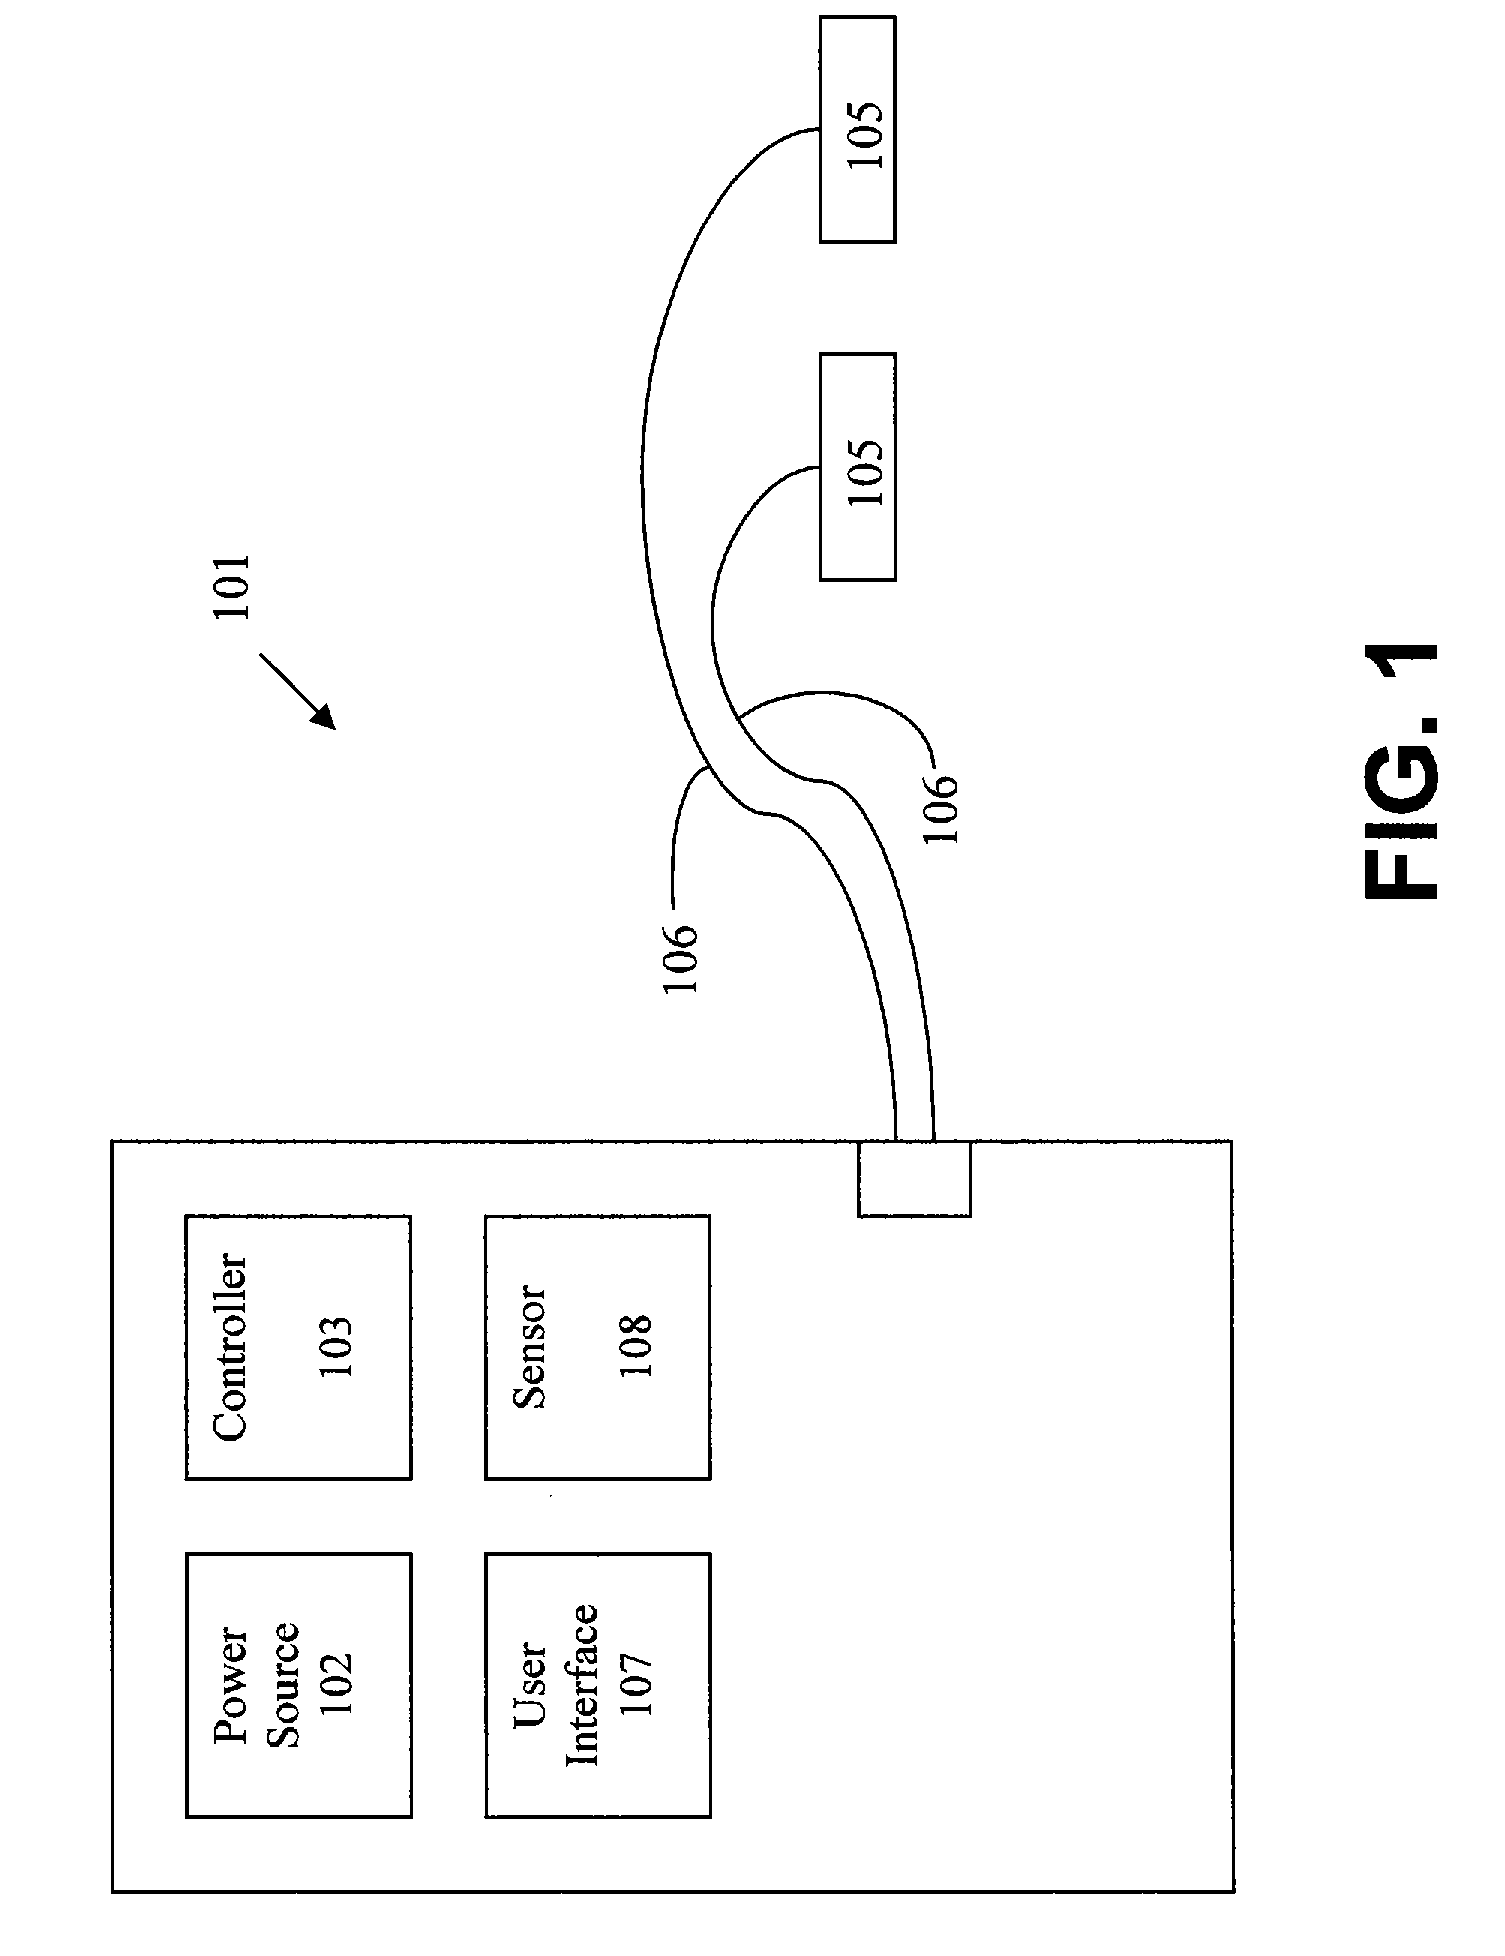 Method and apparatus for defrosting a defibrillation electrode